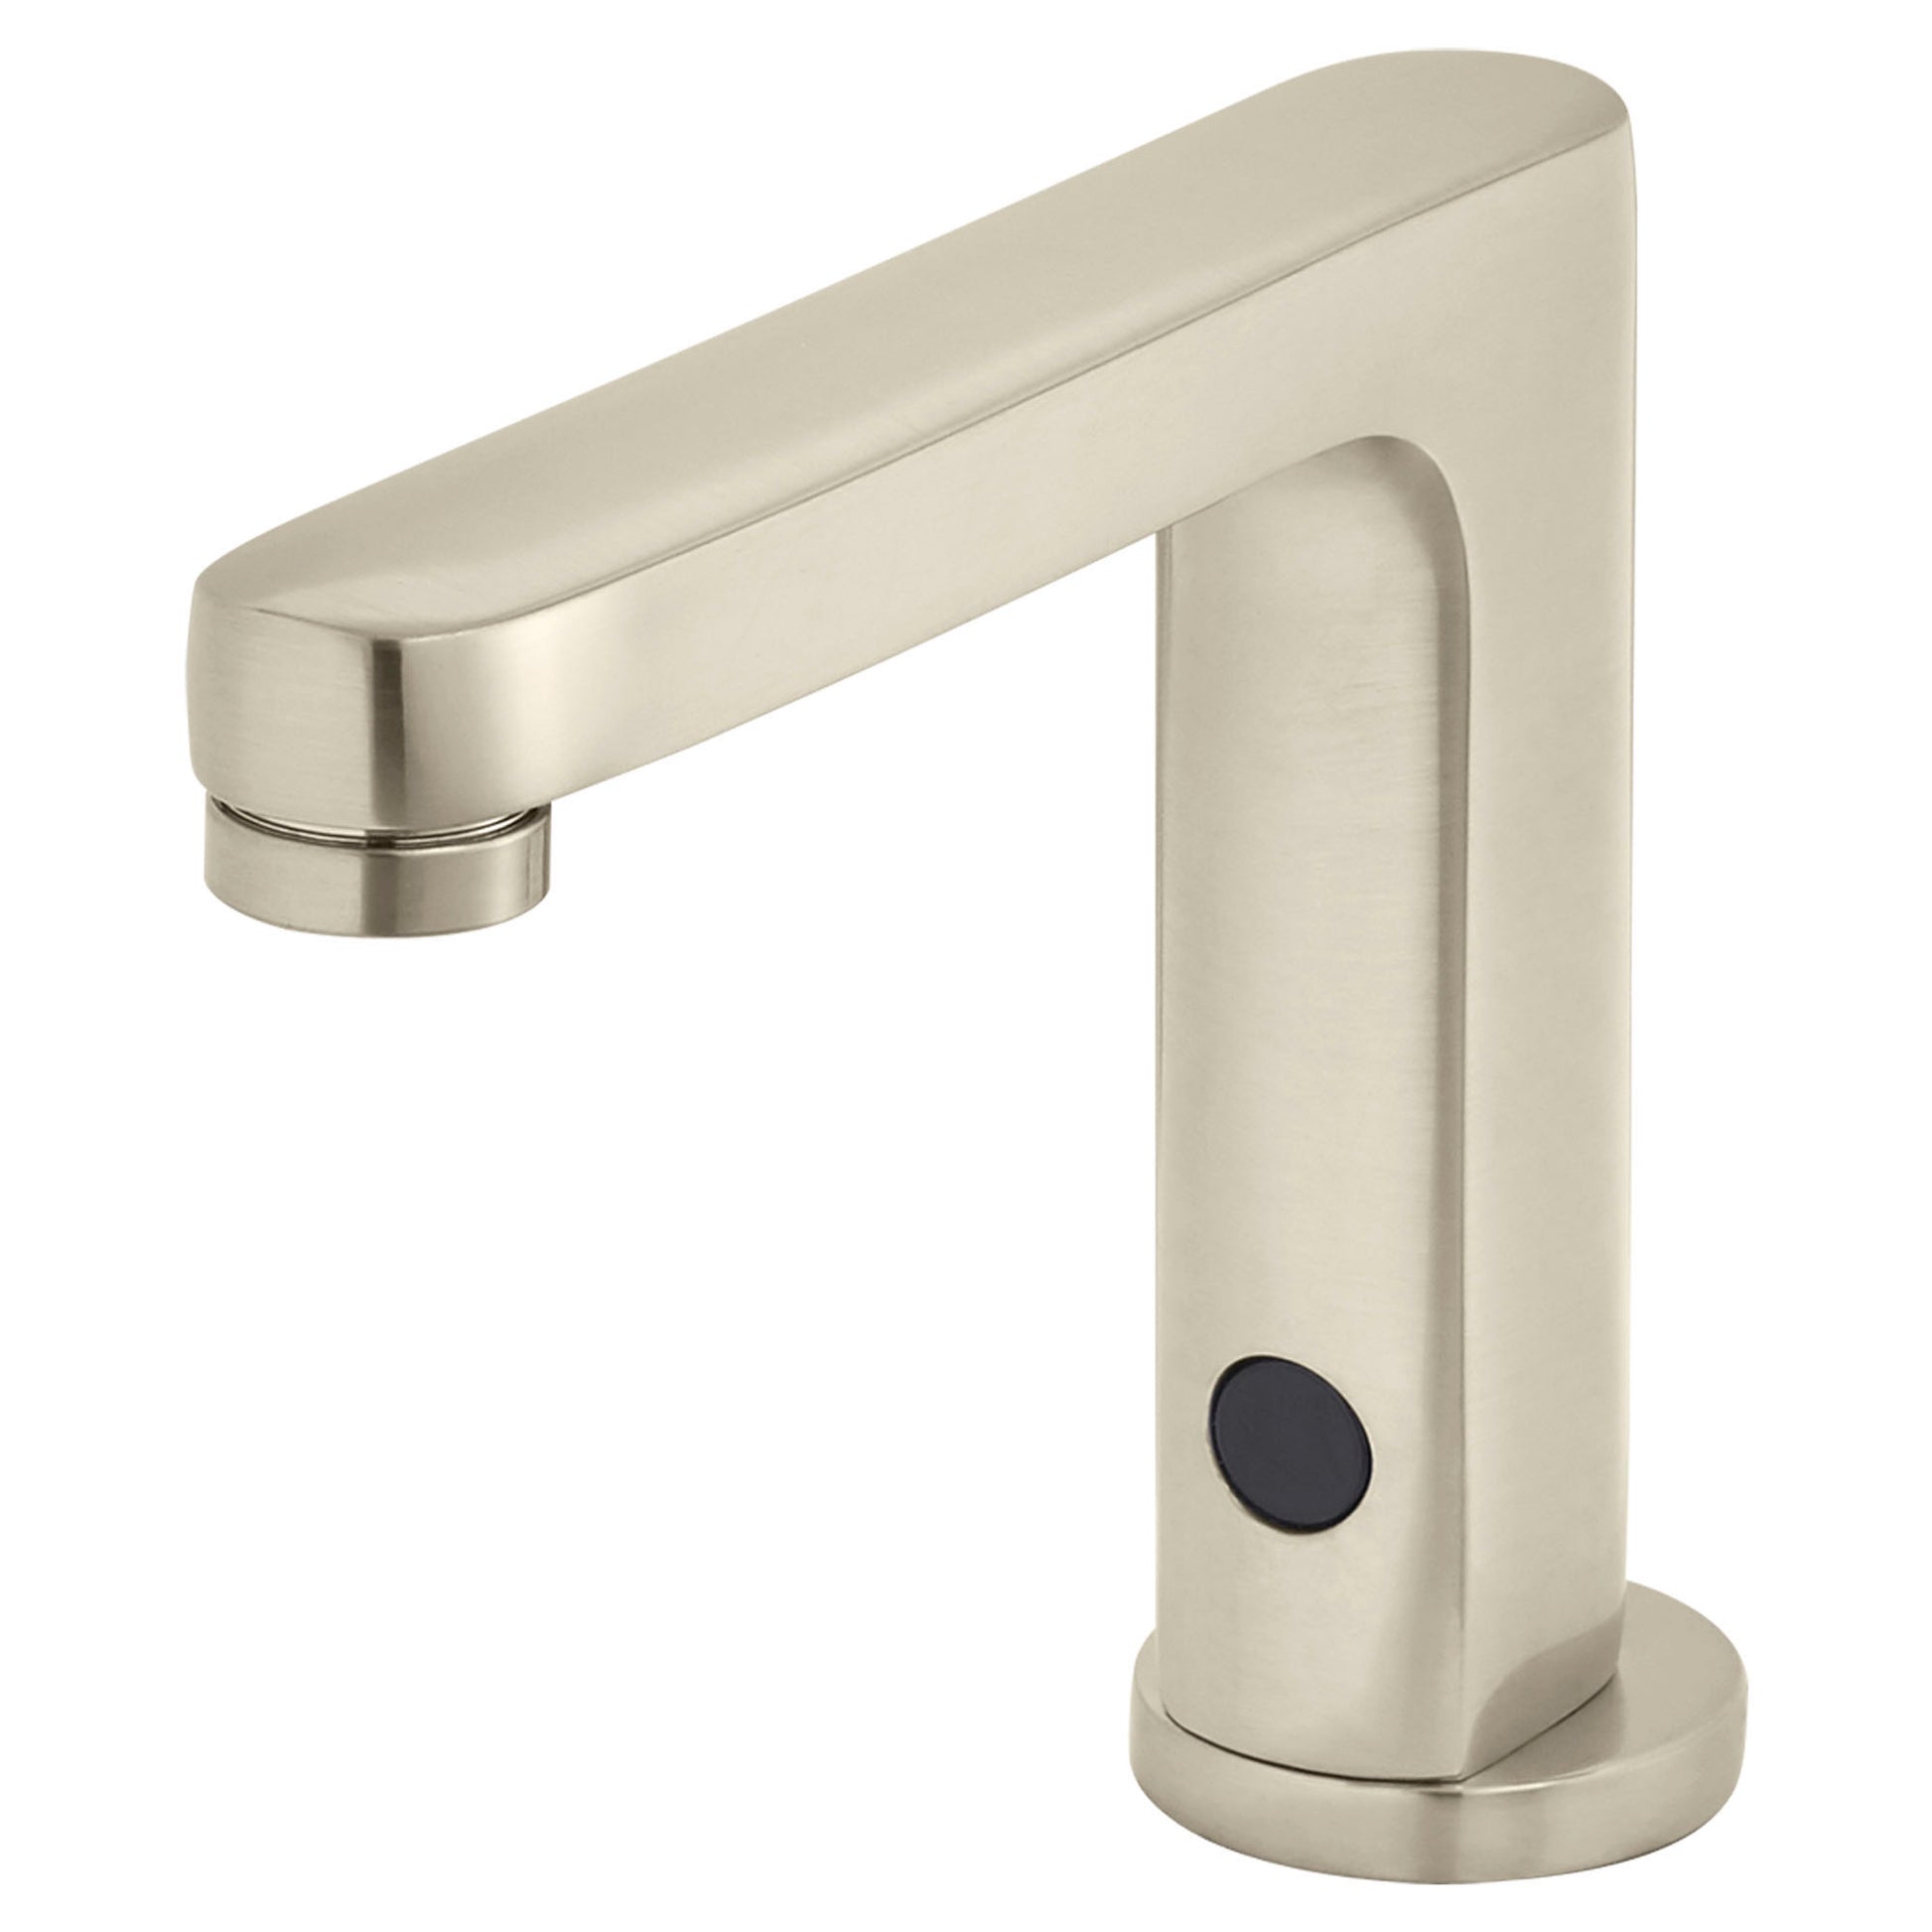 AMERICAN-STANDARD 2506155.295, Moments Selectronic Touchless Faucet, Battery-Powered, 0.5 gpm/1.9 Lpm in Brushed Nickel